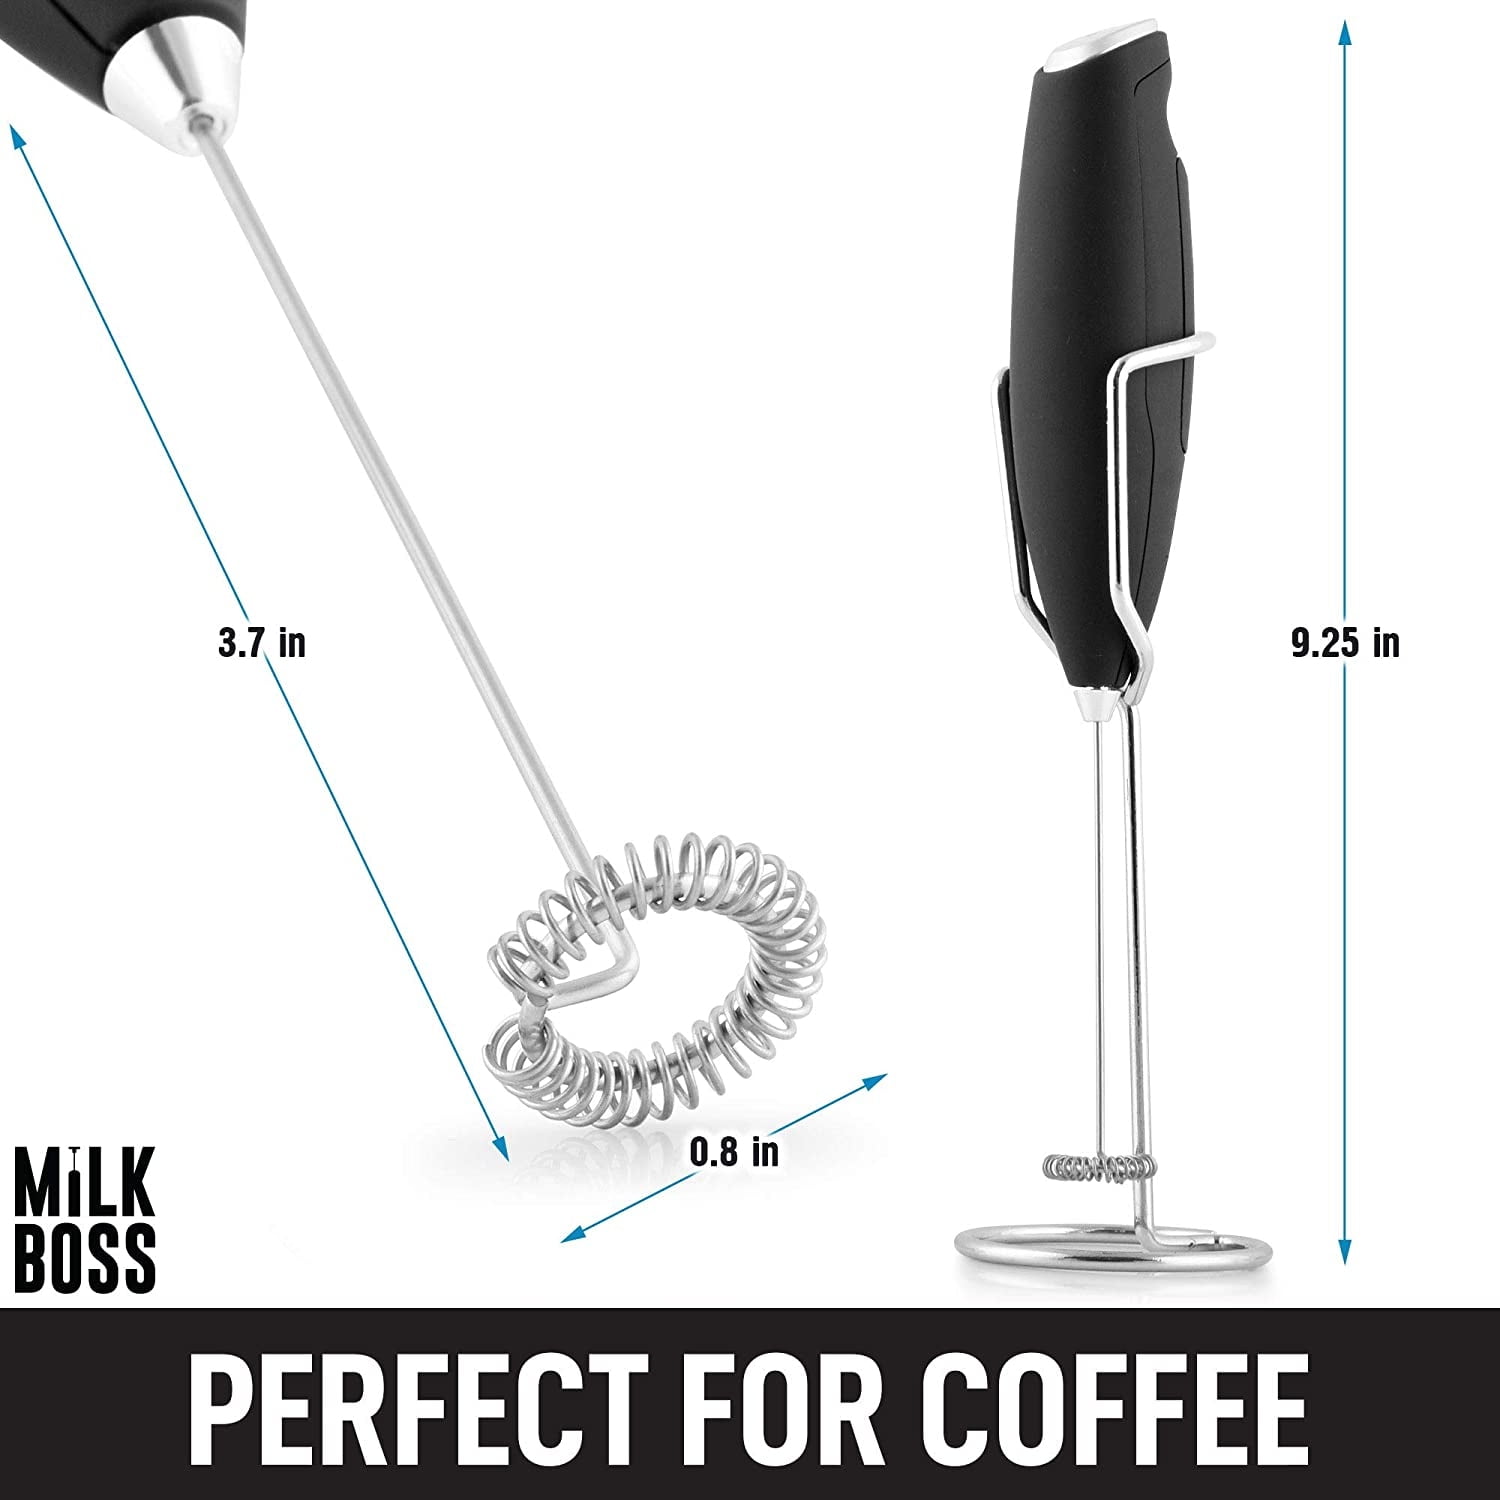 Zulay Kitchen Milk Boss Milk Frother (Without Stand) - Matte Black